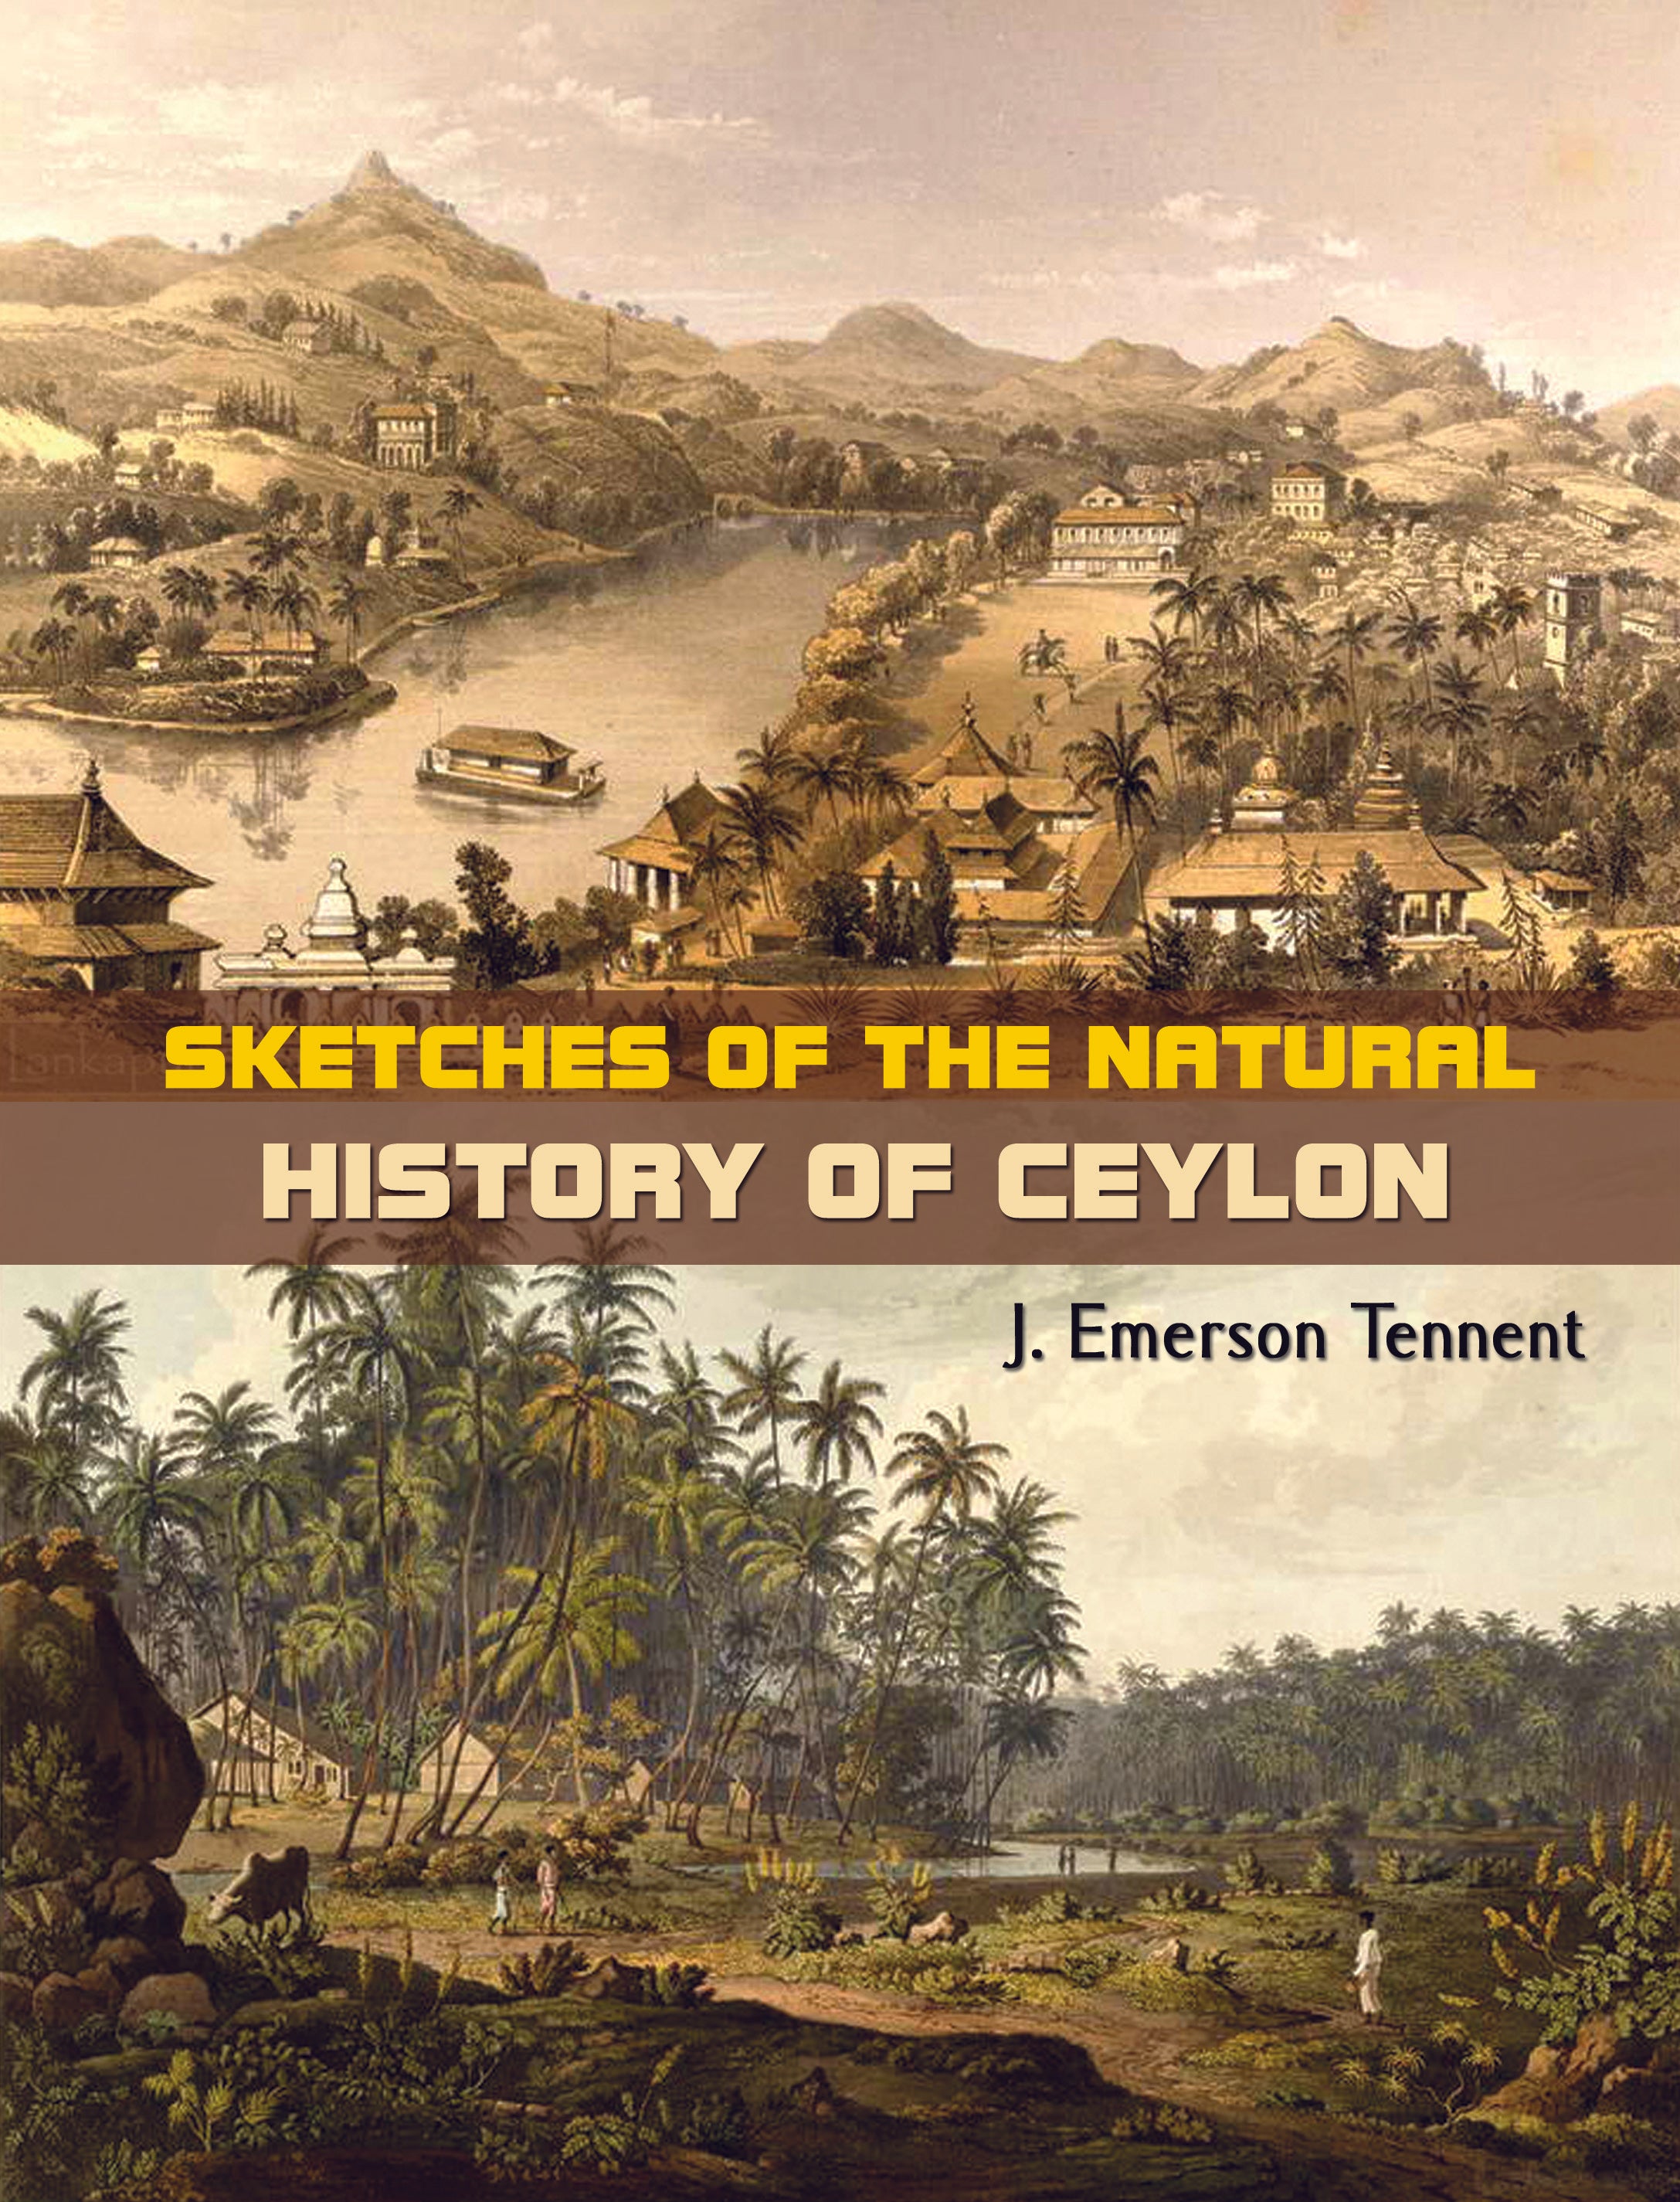 The Western World Picturesque Sketches of Nature and Natural History in  North and South America eBook by William Henry Giles Kingston  EPUB Book   Rakuten Kobo India